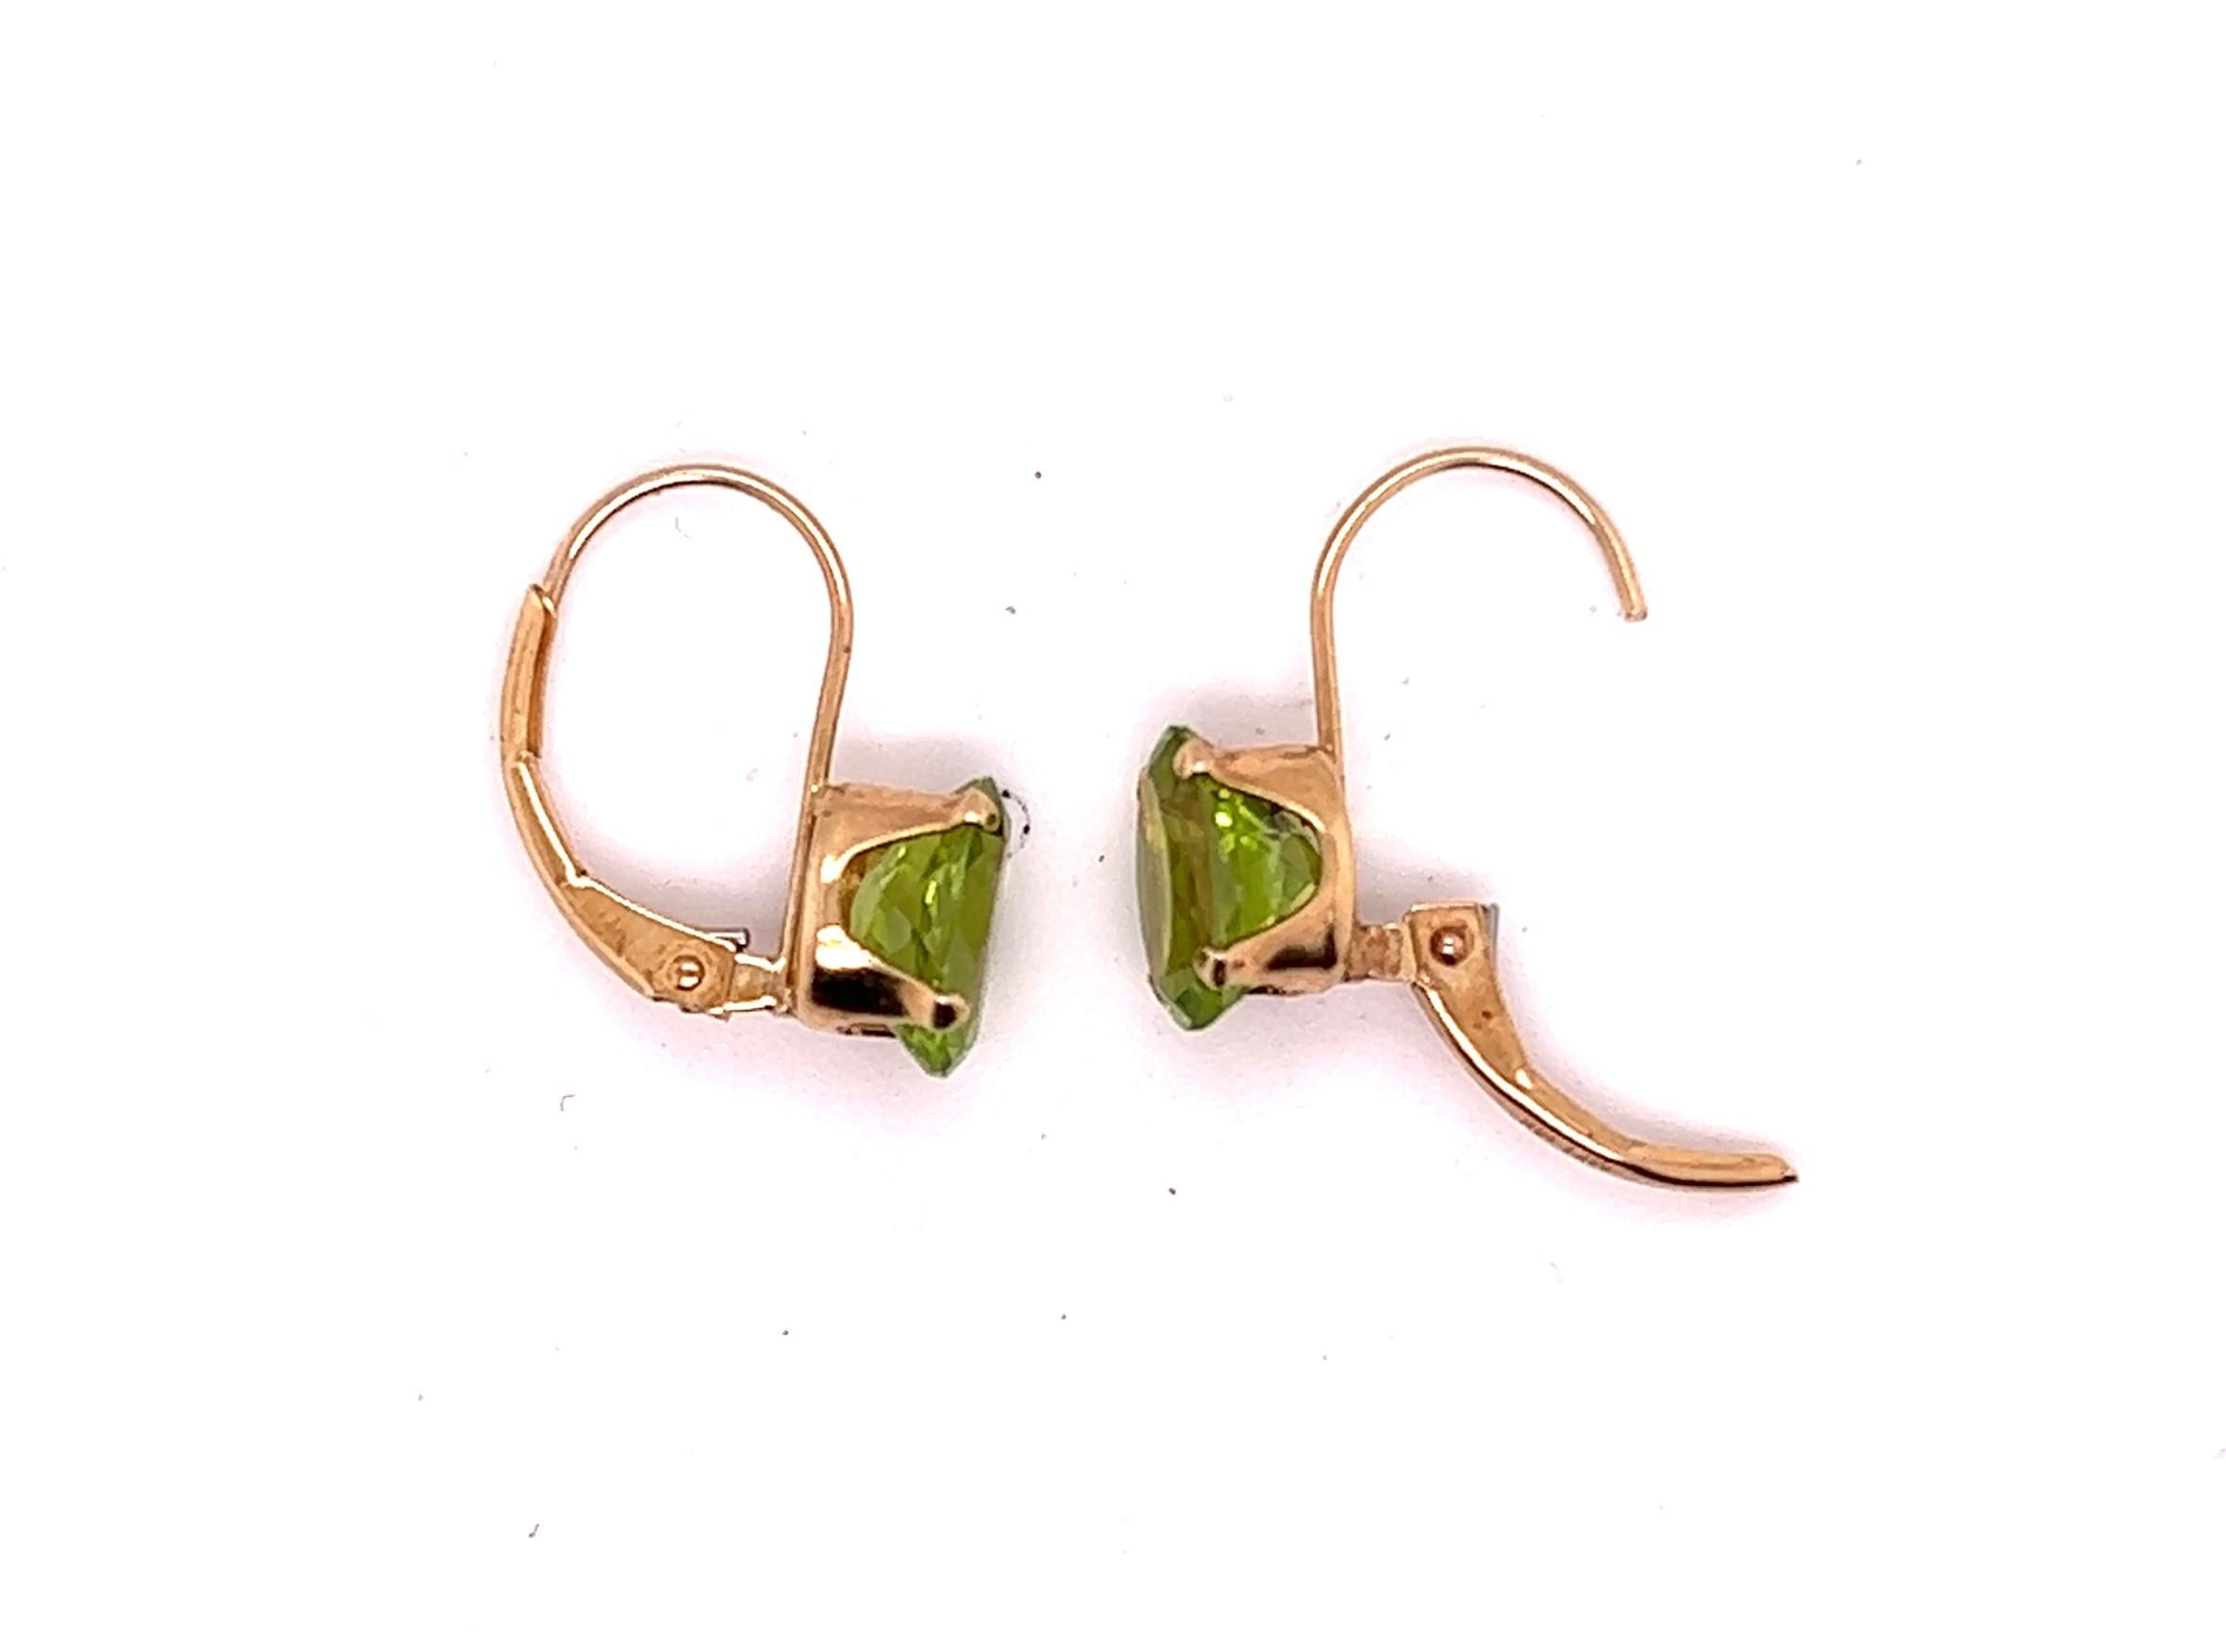 14 KT Yellow Gold 3.24 total carat weight Peridot Lever Back Earrings.

The earrings hang 5/8 inch in length and the peridots are approx. 5/16 inch long.